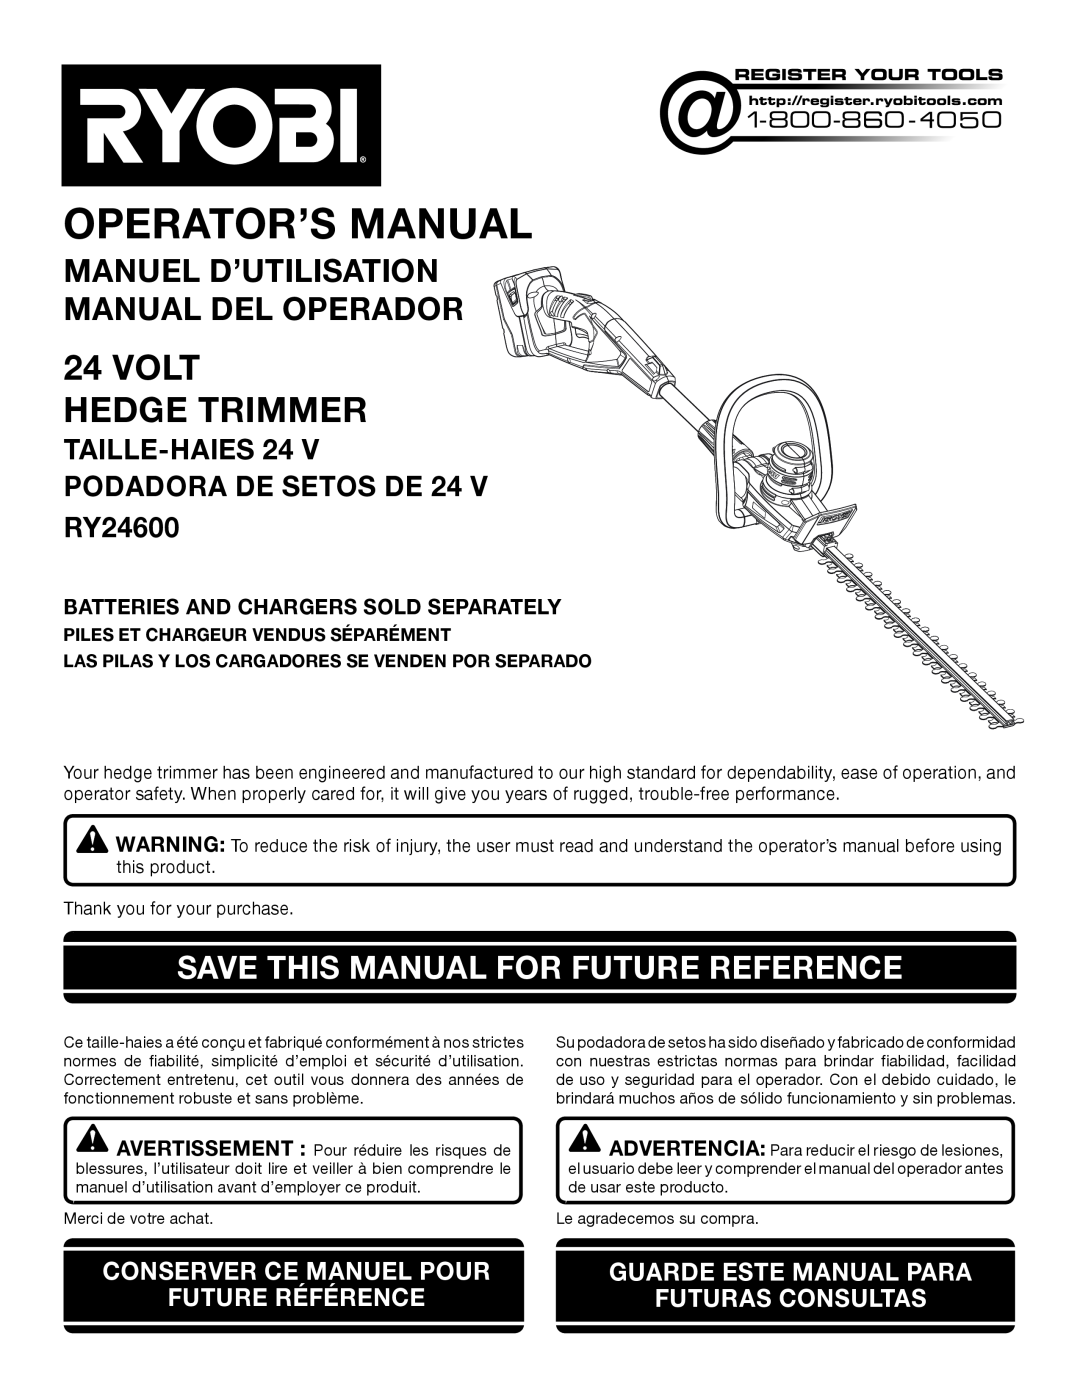 Ryobi RY24600 manuel dutilisation Volt Hedge Trimmer, Save This Manual For Future Reference, Operator’S Manual 